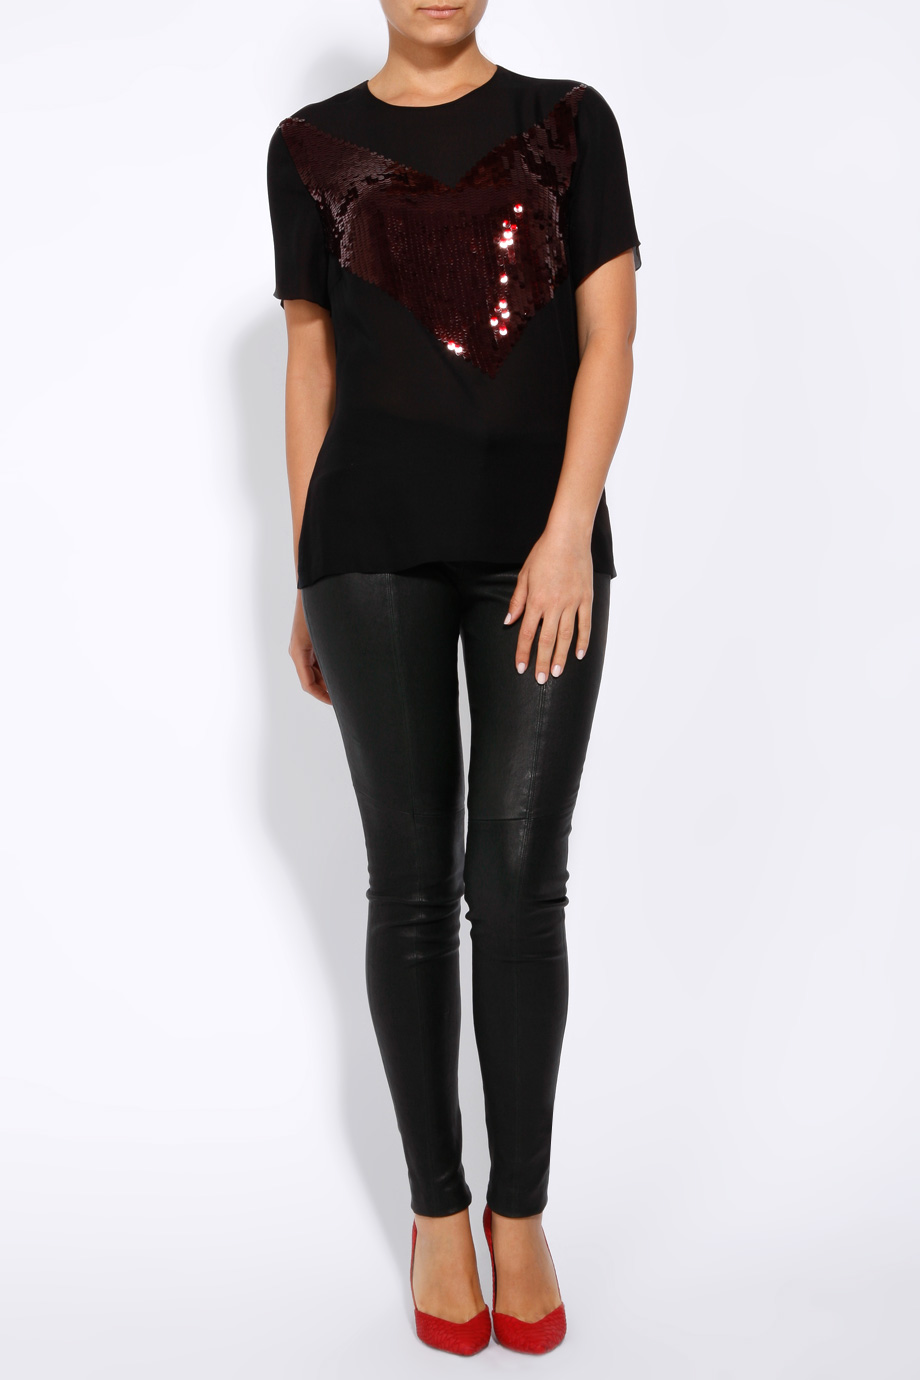 model wearing Jason Wu black sequin embelished tee with black skinny leather pants and red pumps